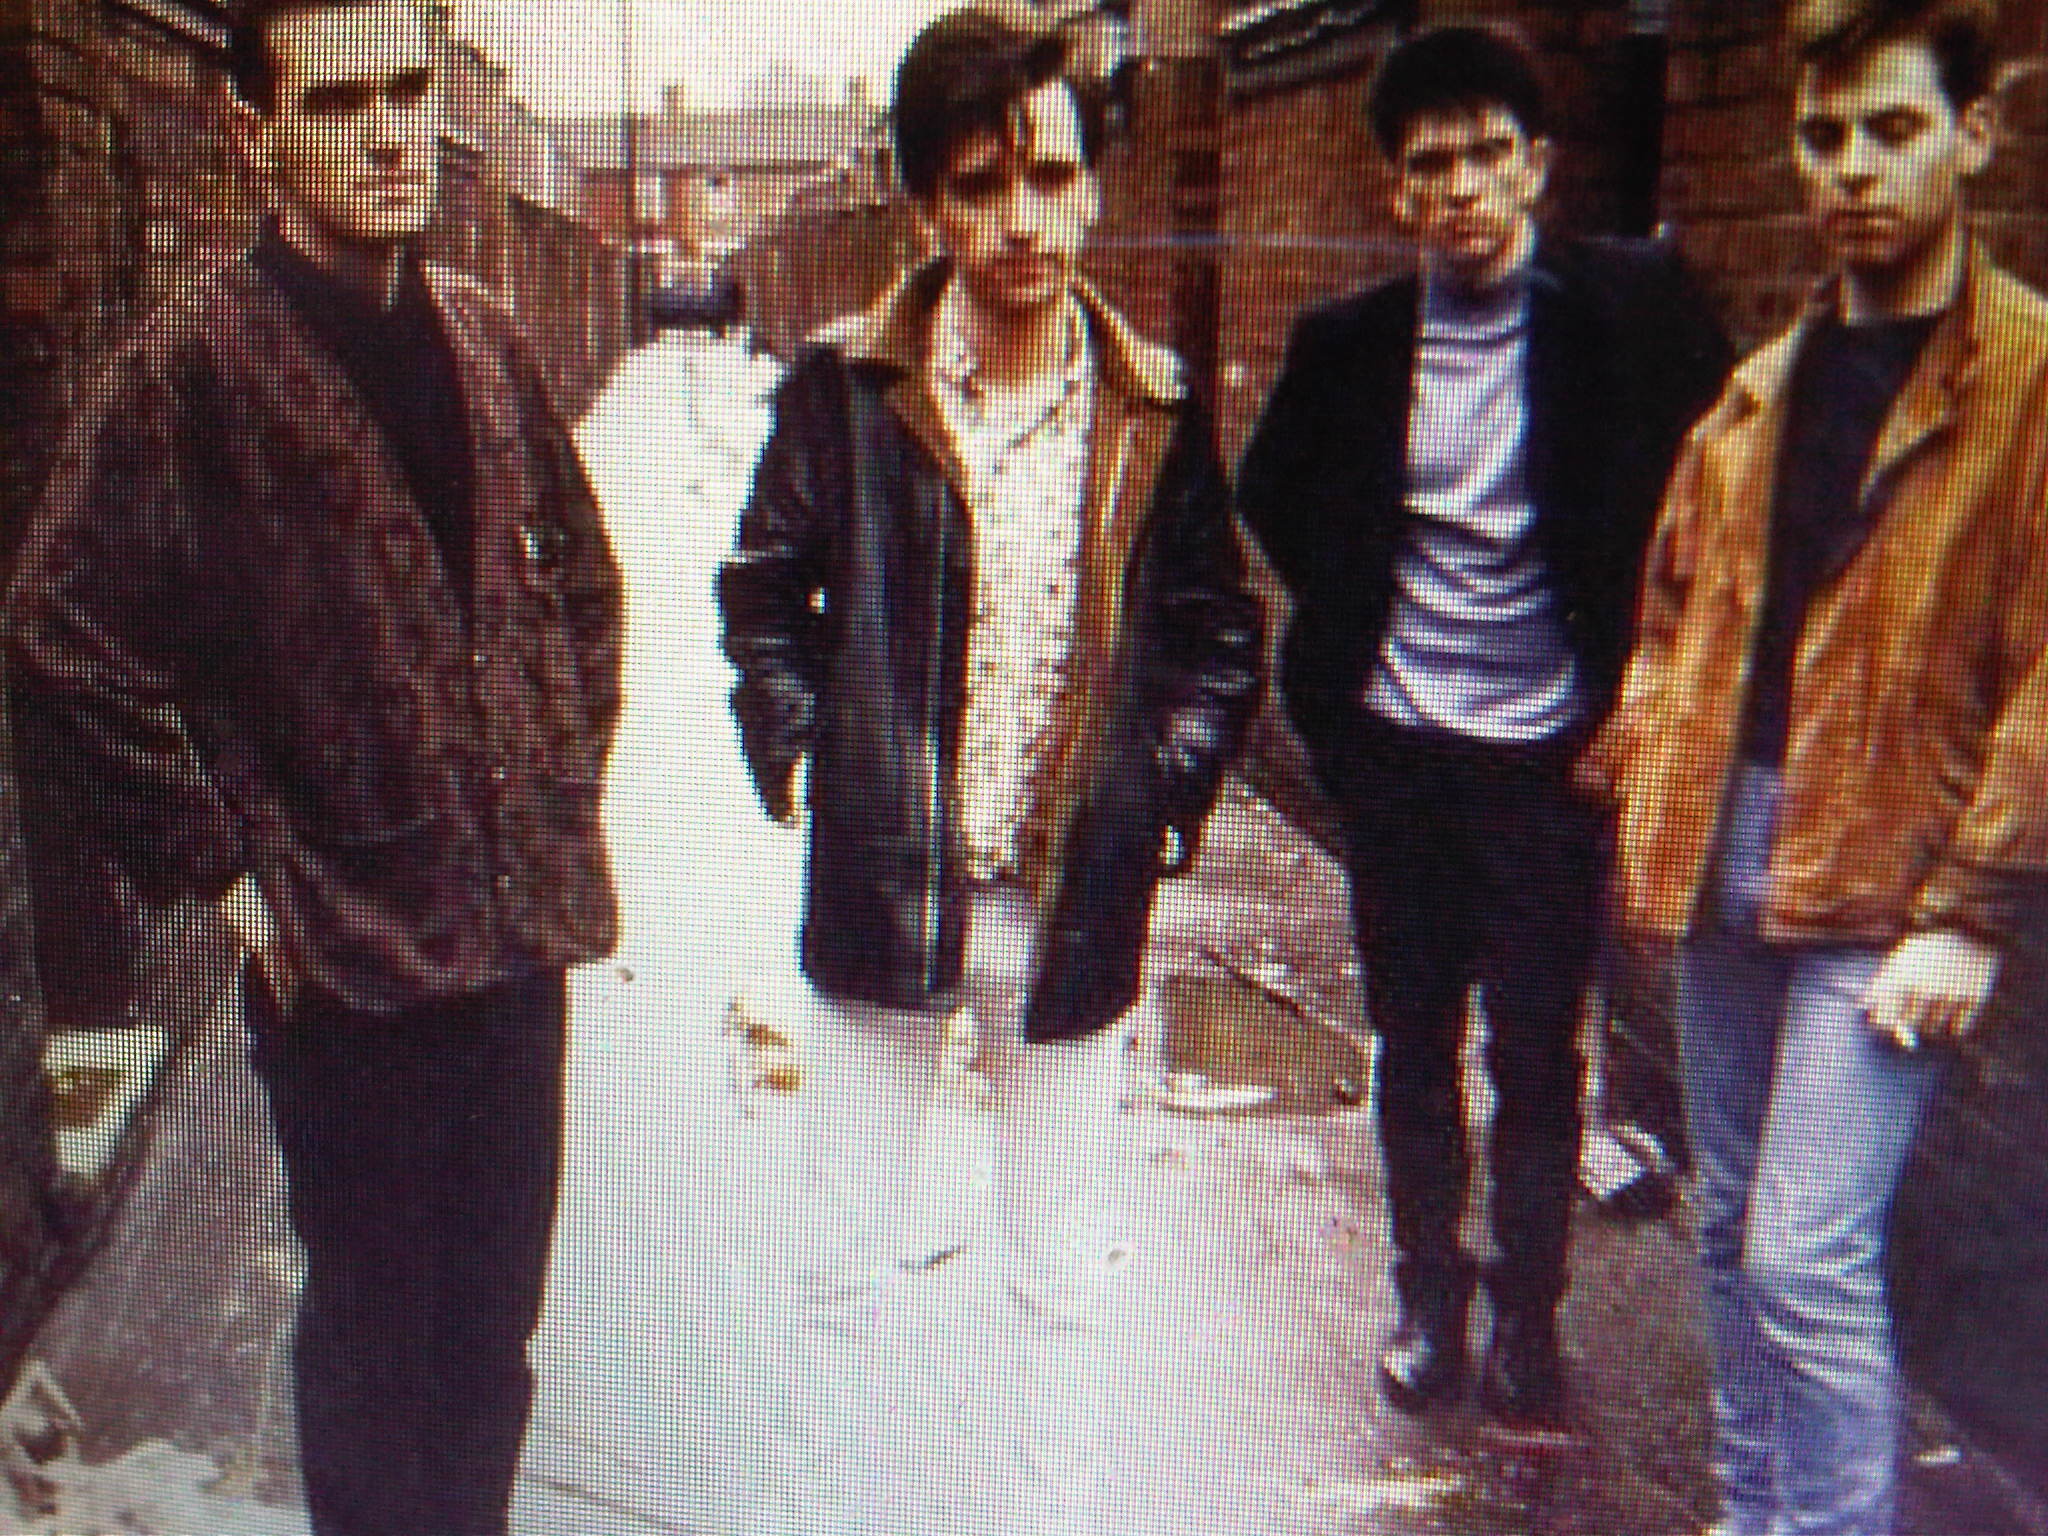 The Smiths Wallpaper.